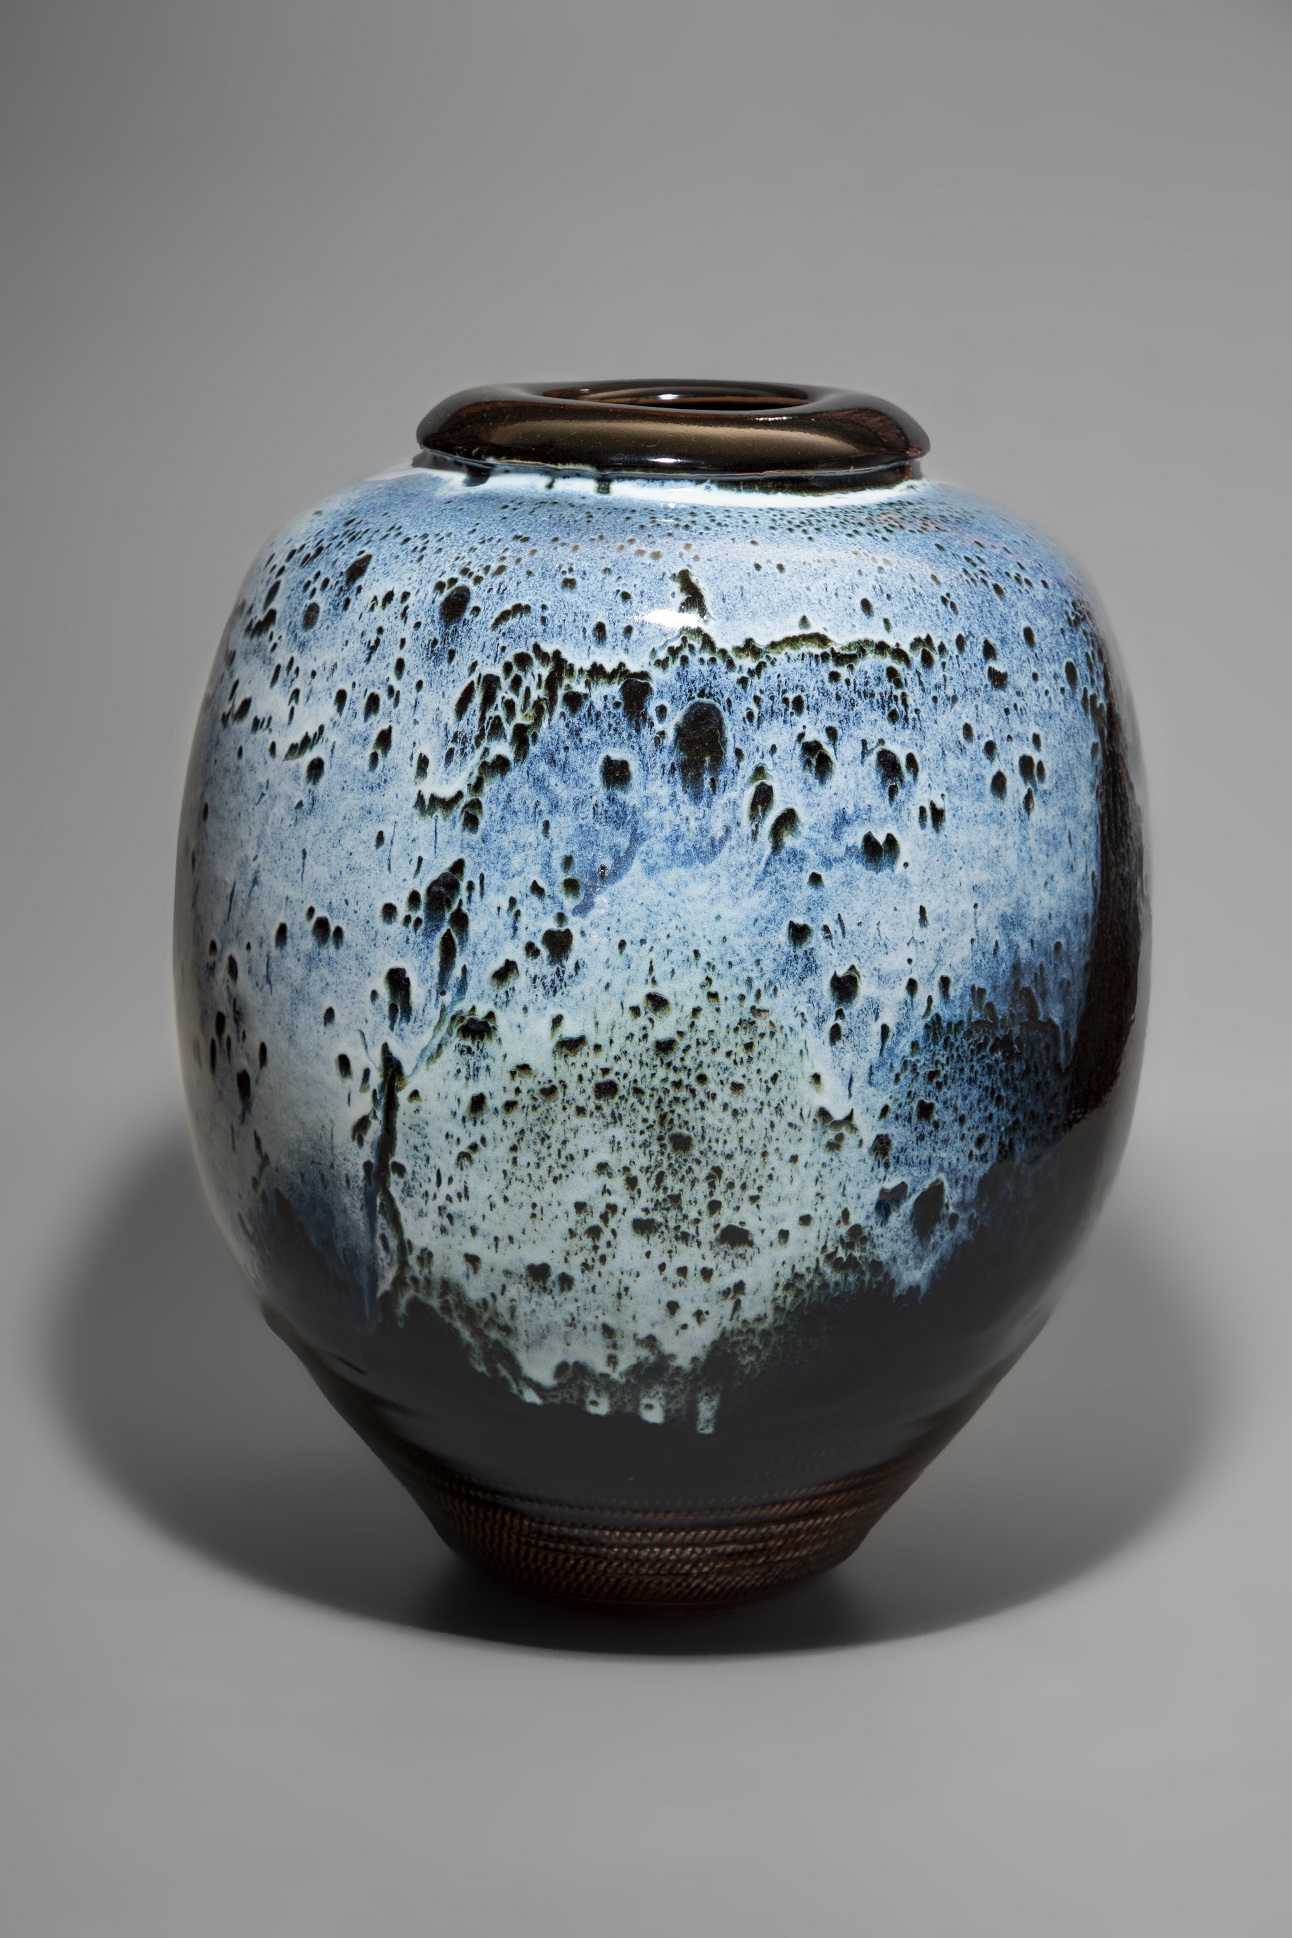 Vase sculpture, work by Neil Grant. Photo: Thomas Lord